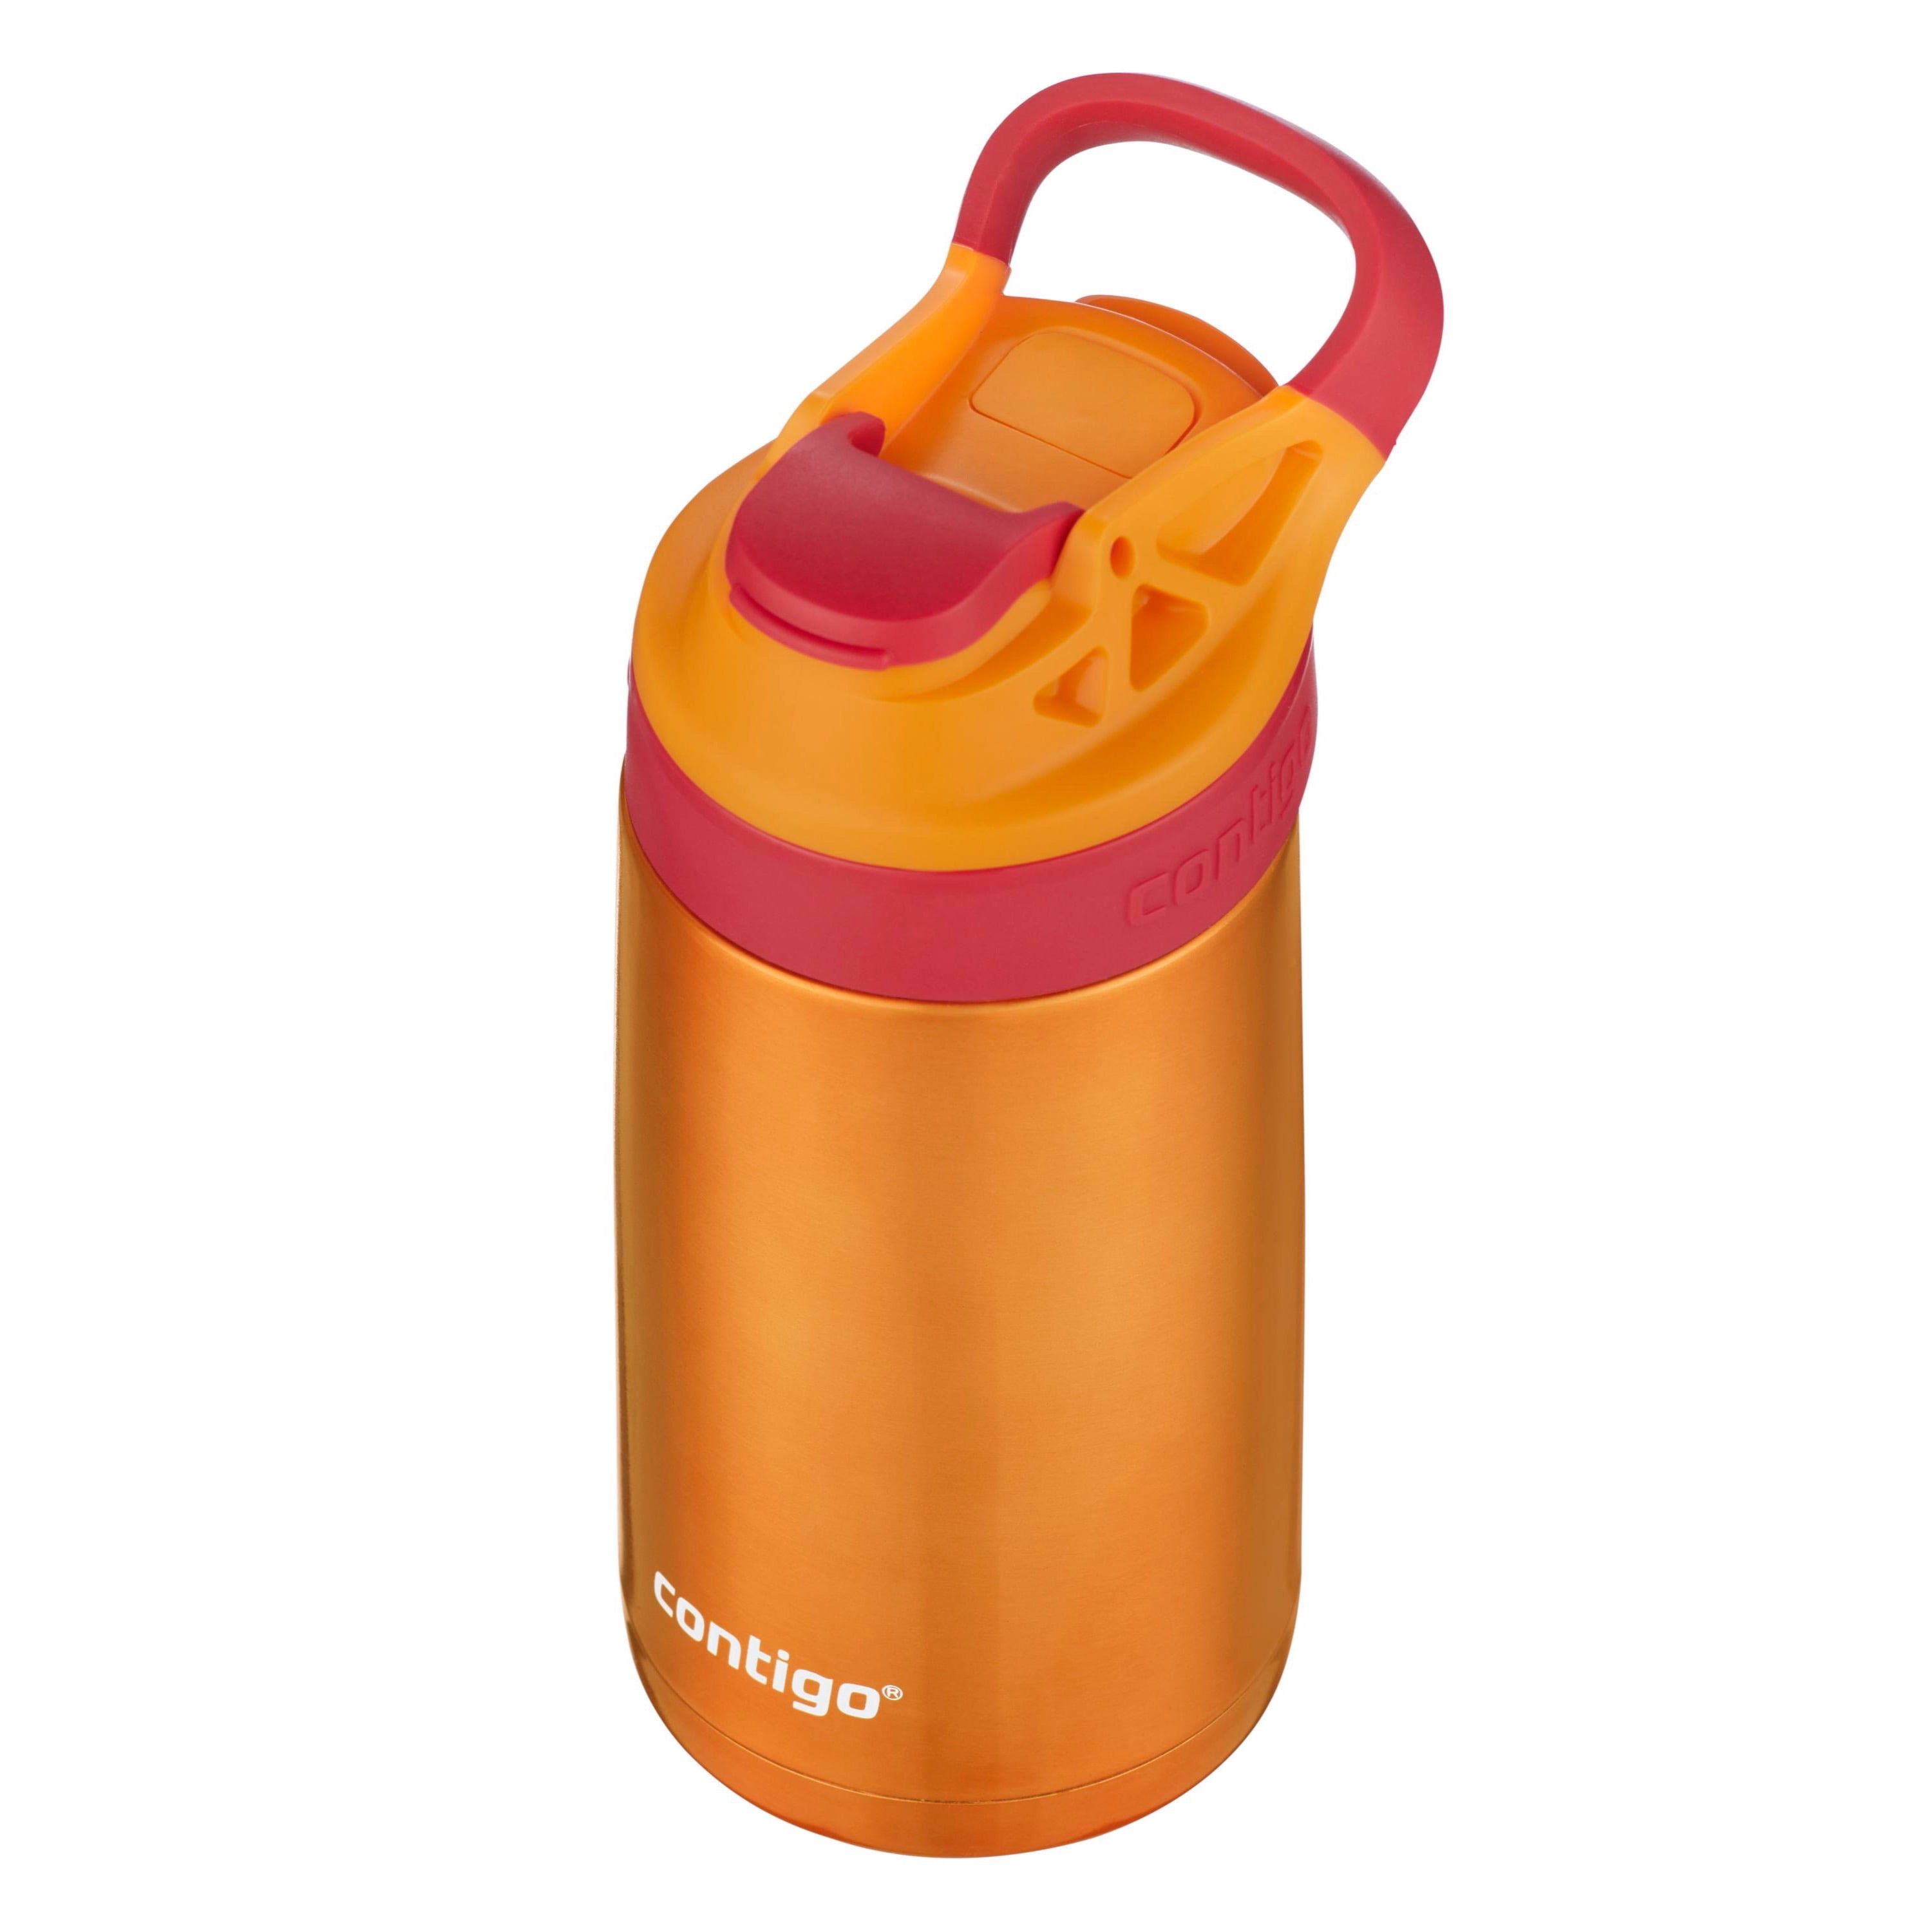 3-Pack Contigo Water Bottles for $16.97 :: Southern Savers